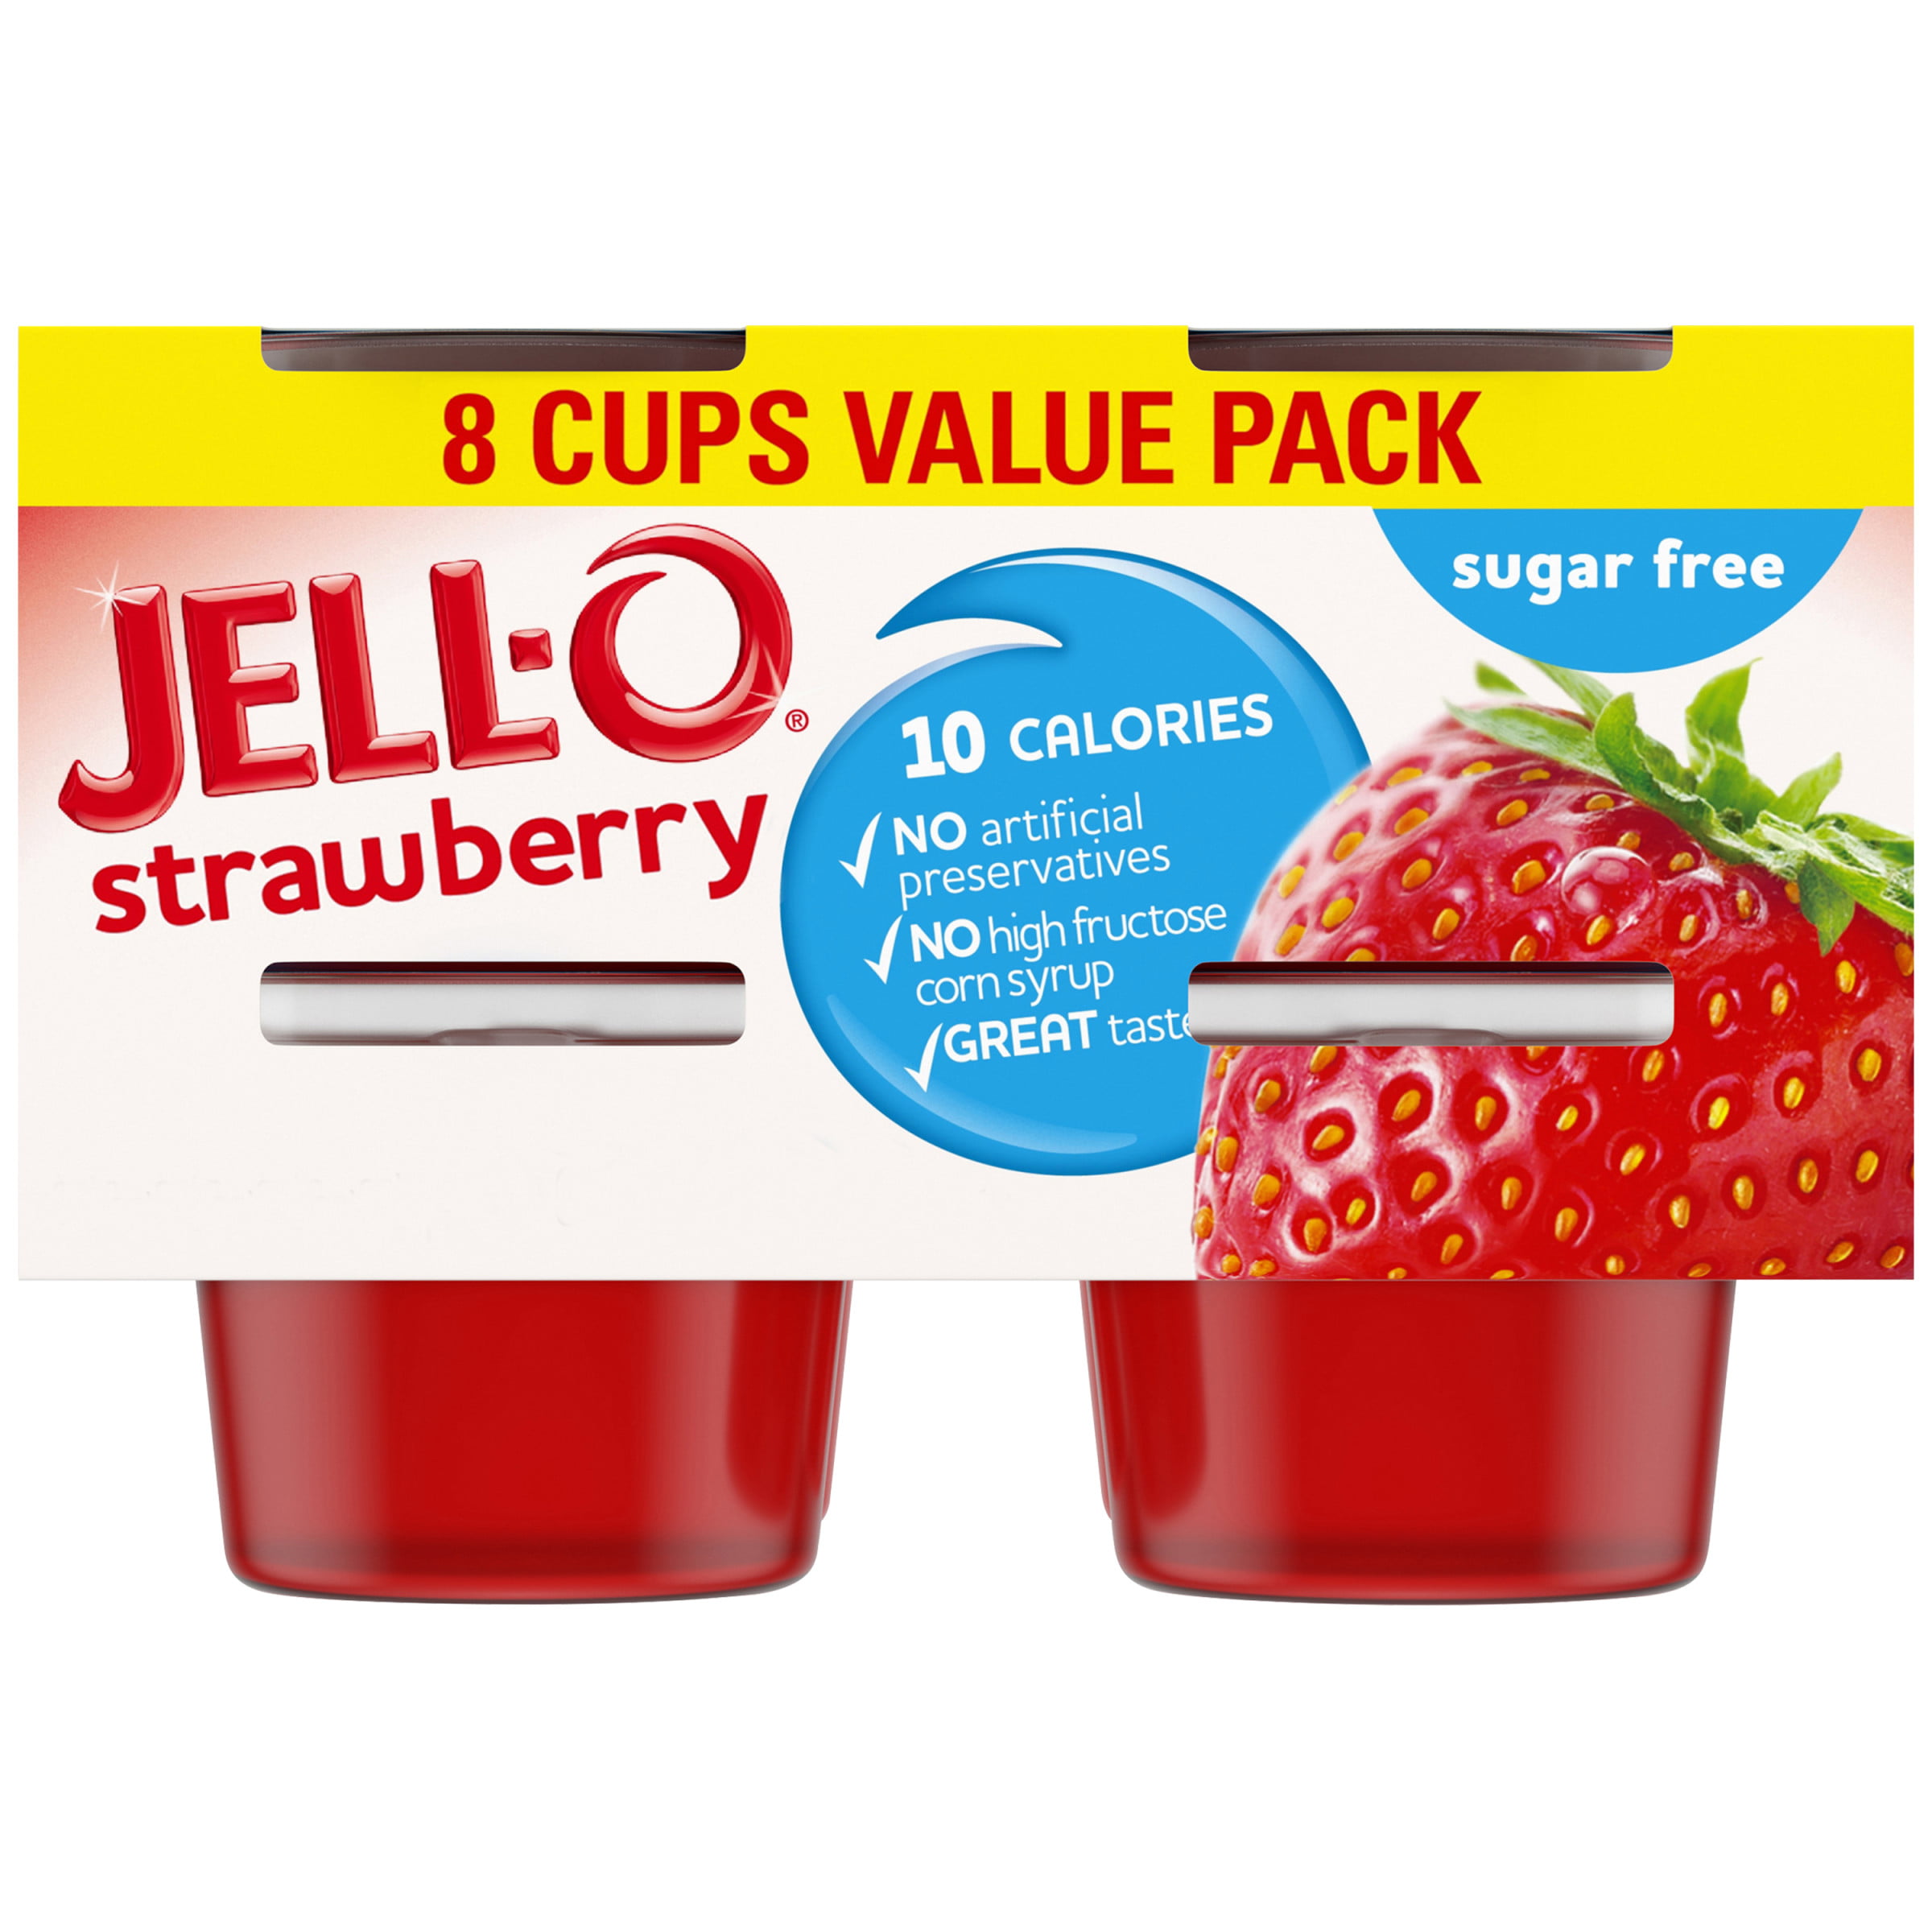 Jell-O Strawberry Sugar Free Ready-to-Eat Gelatin Snacks Value Pack, 8 ...